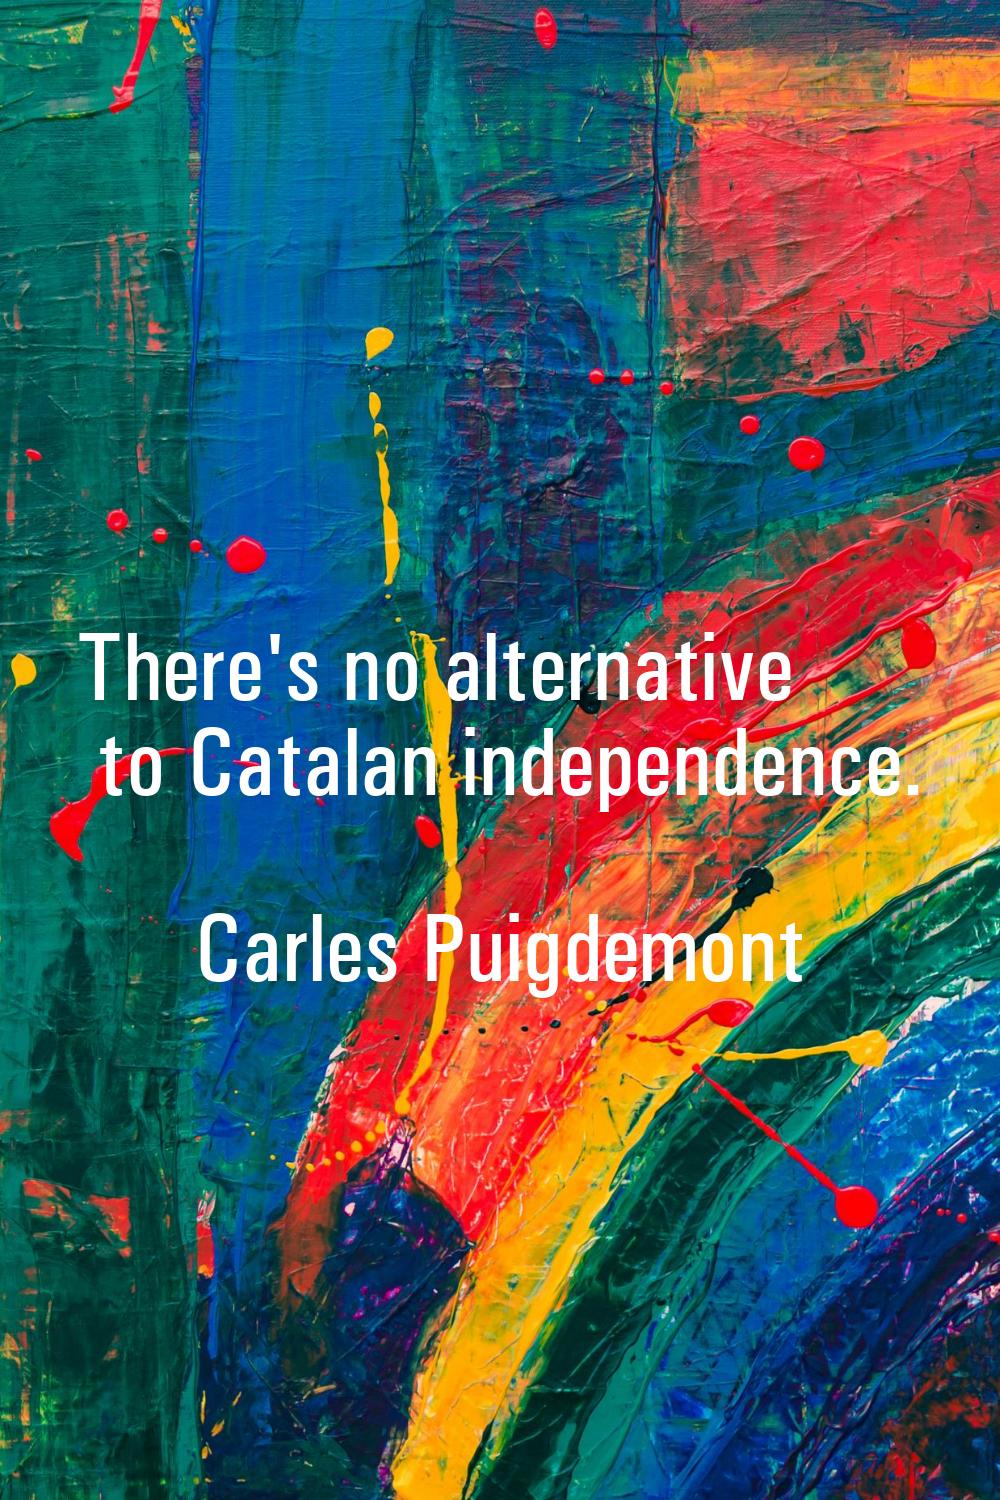 There's no alternative to Catalan independence.